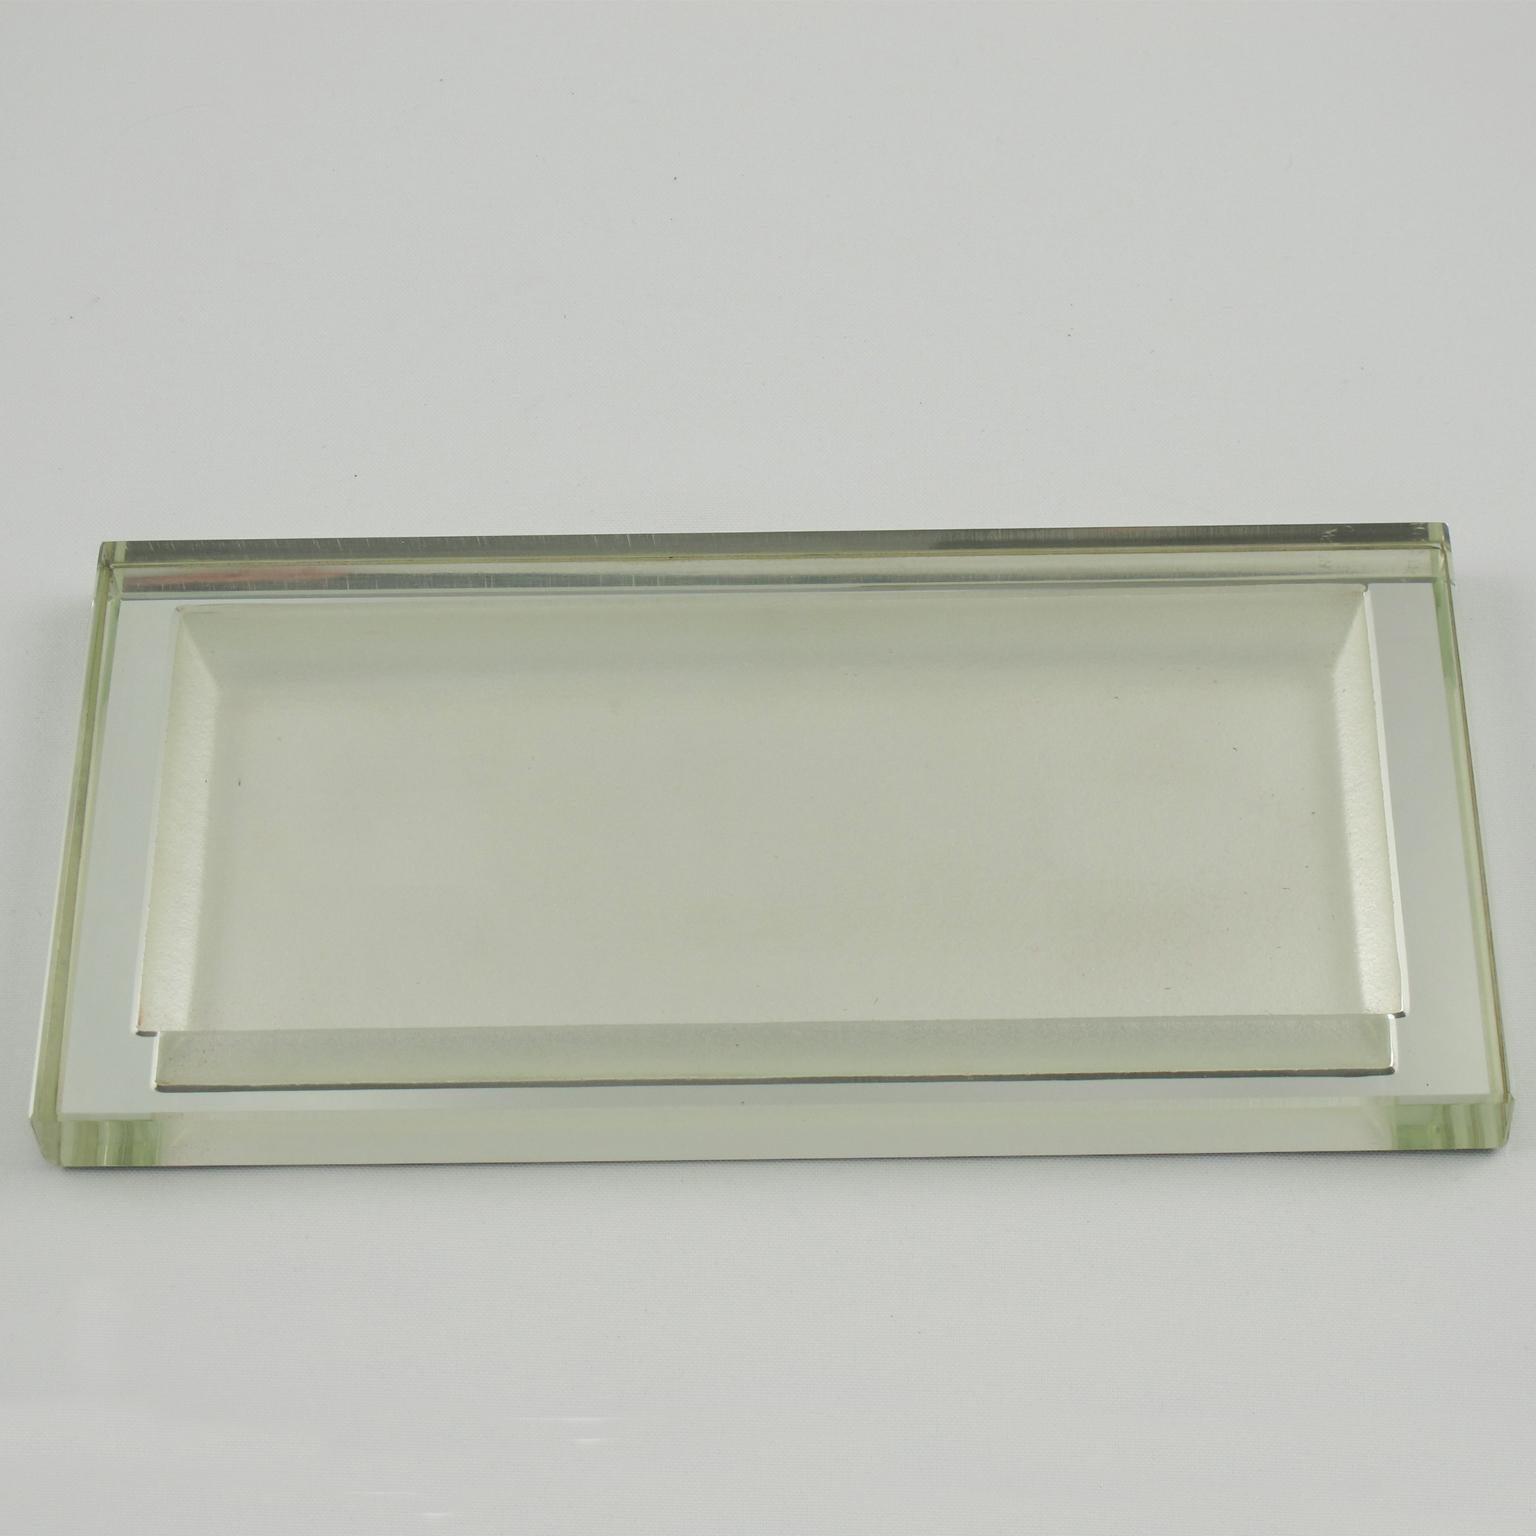 Refined Art Deco thick mirrored glass slab tray, platter, or catchall by French designer Jean Luce (1895-1964). Elegant rectangular shape with an etched center in a frosted textured pattern. A perfect accessory for desk or pen tray or ring